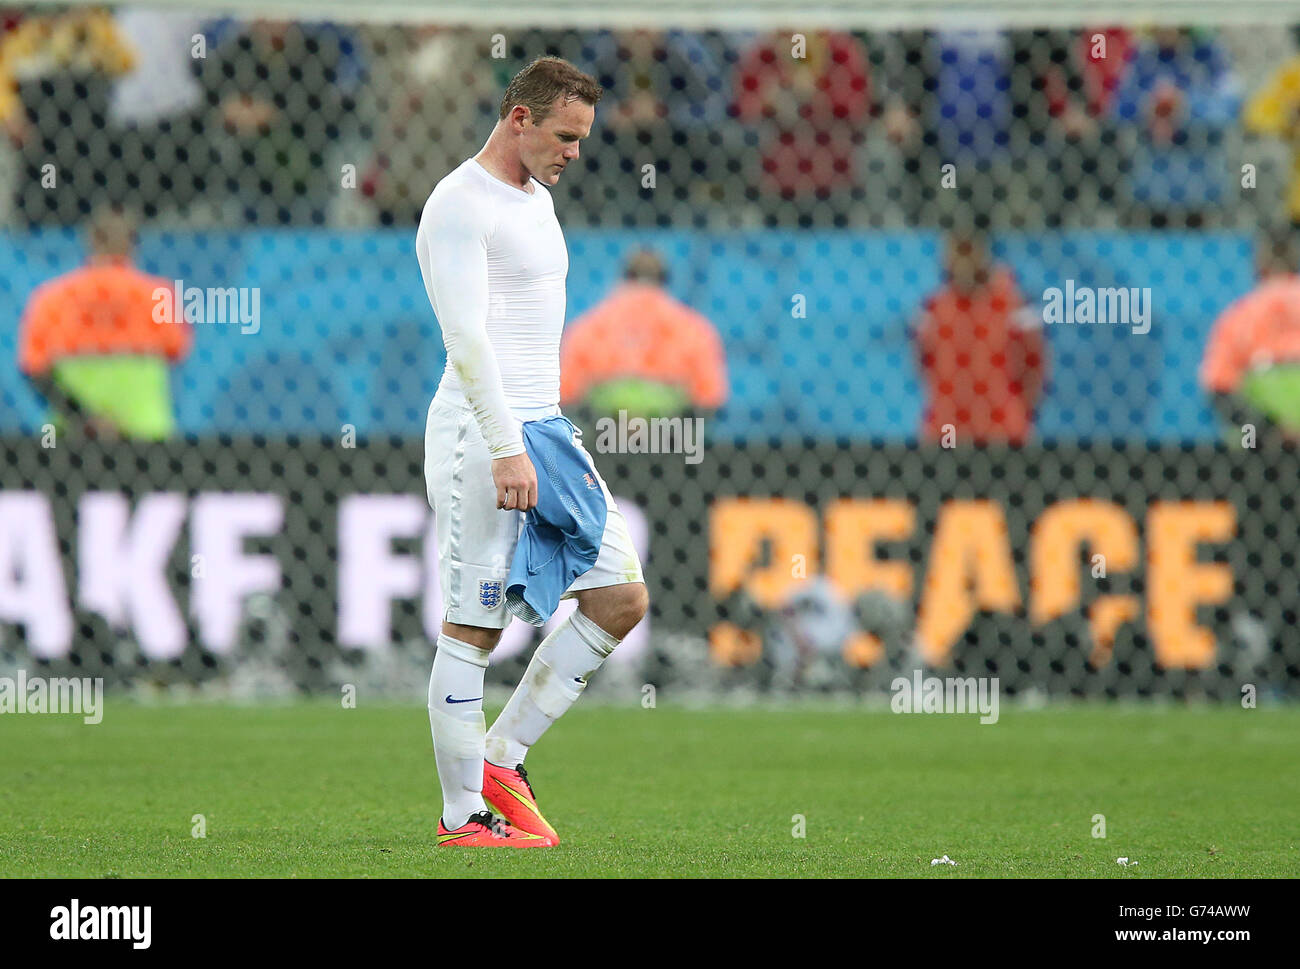 Soccer - FIFA World Cup 2014 - Group D - Uruguay v England - Estadio Do Sao Paulo. England's Wayne Rooney walks off dejected after the final whistle during the Group D match the Estadio do Sao Paulo, Sao Paulo, Brazil. Stock Photo